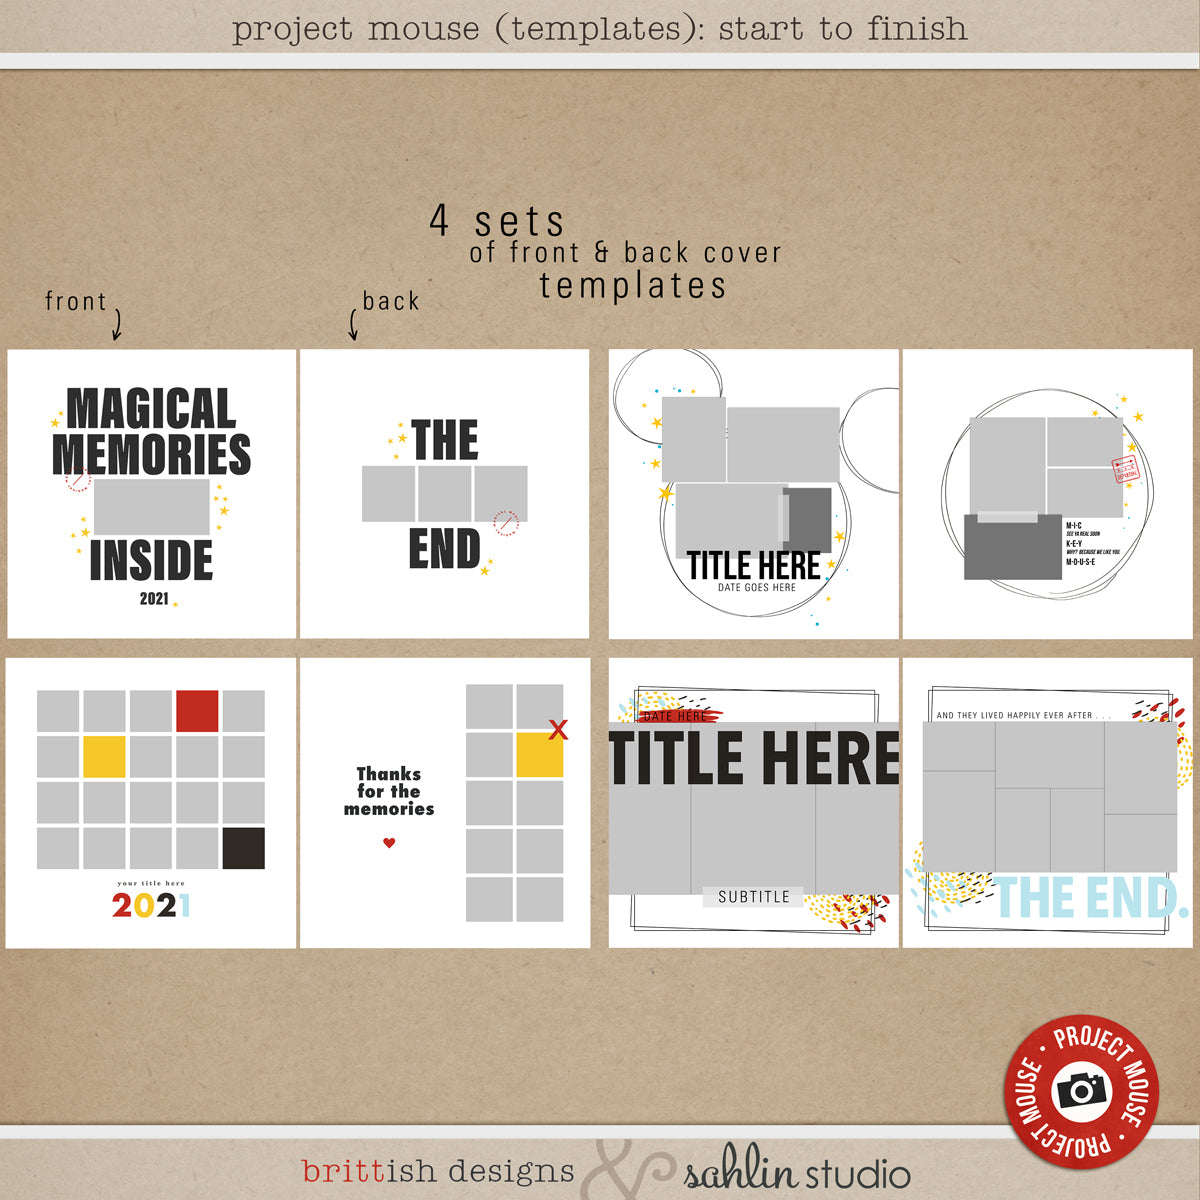 Project Mouse (Templates): Start to Finish